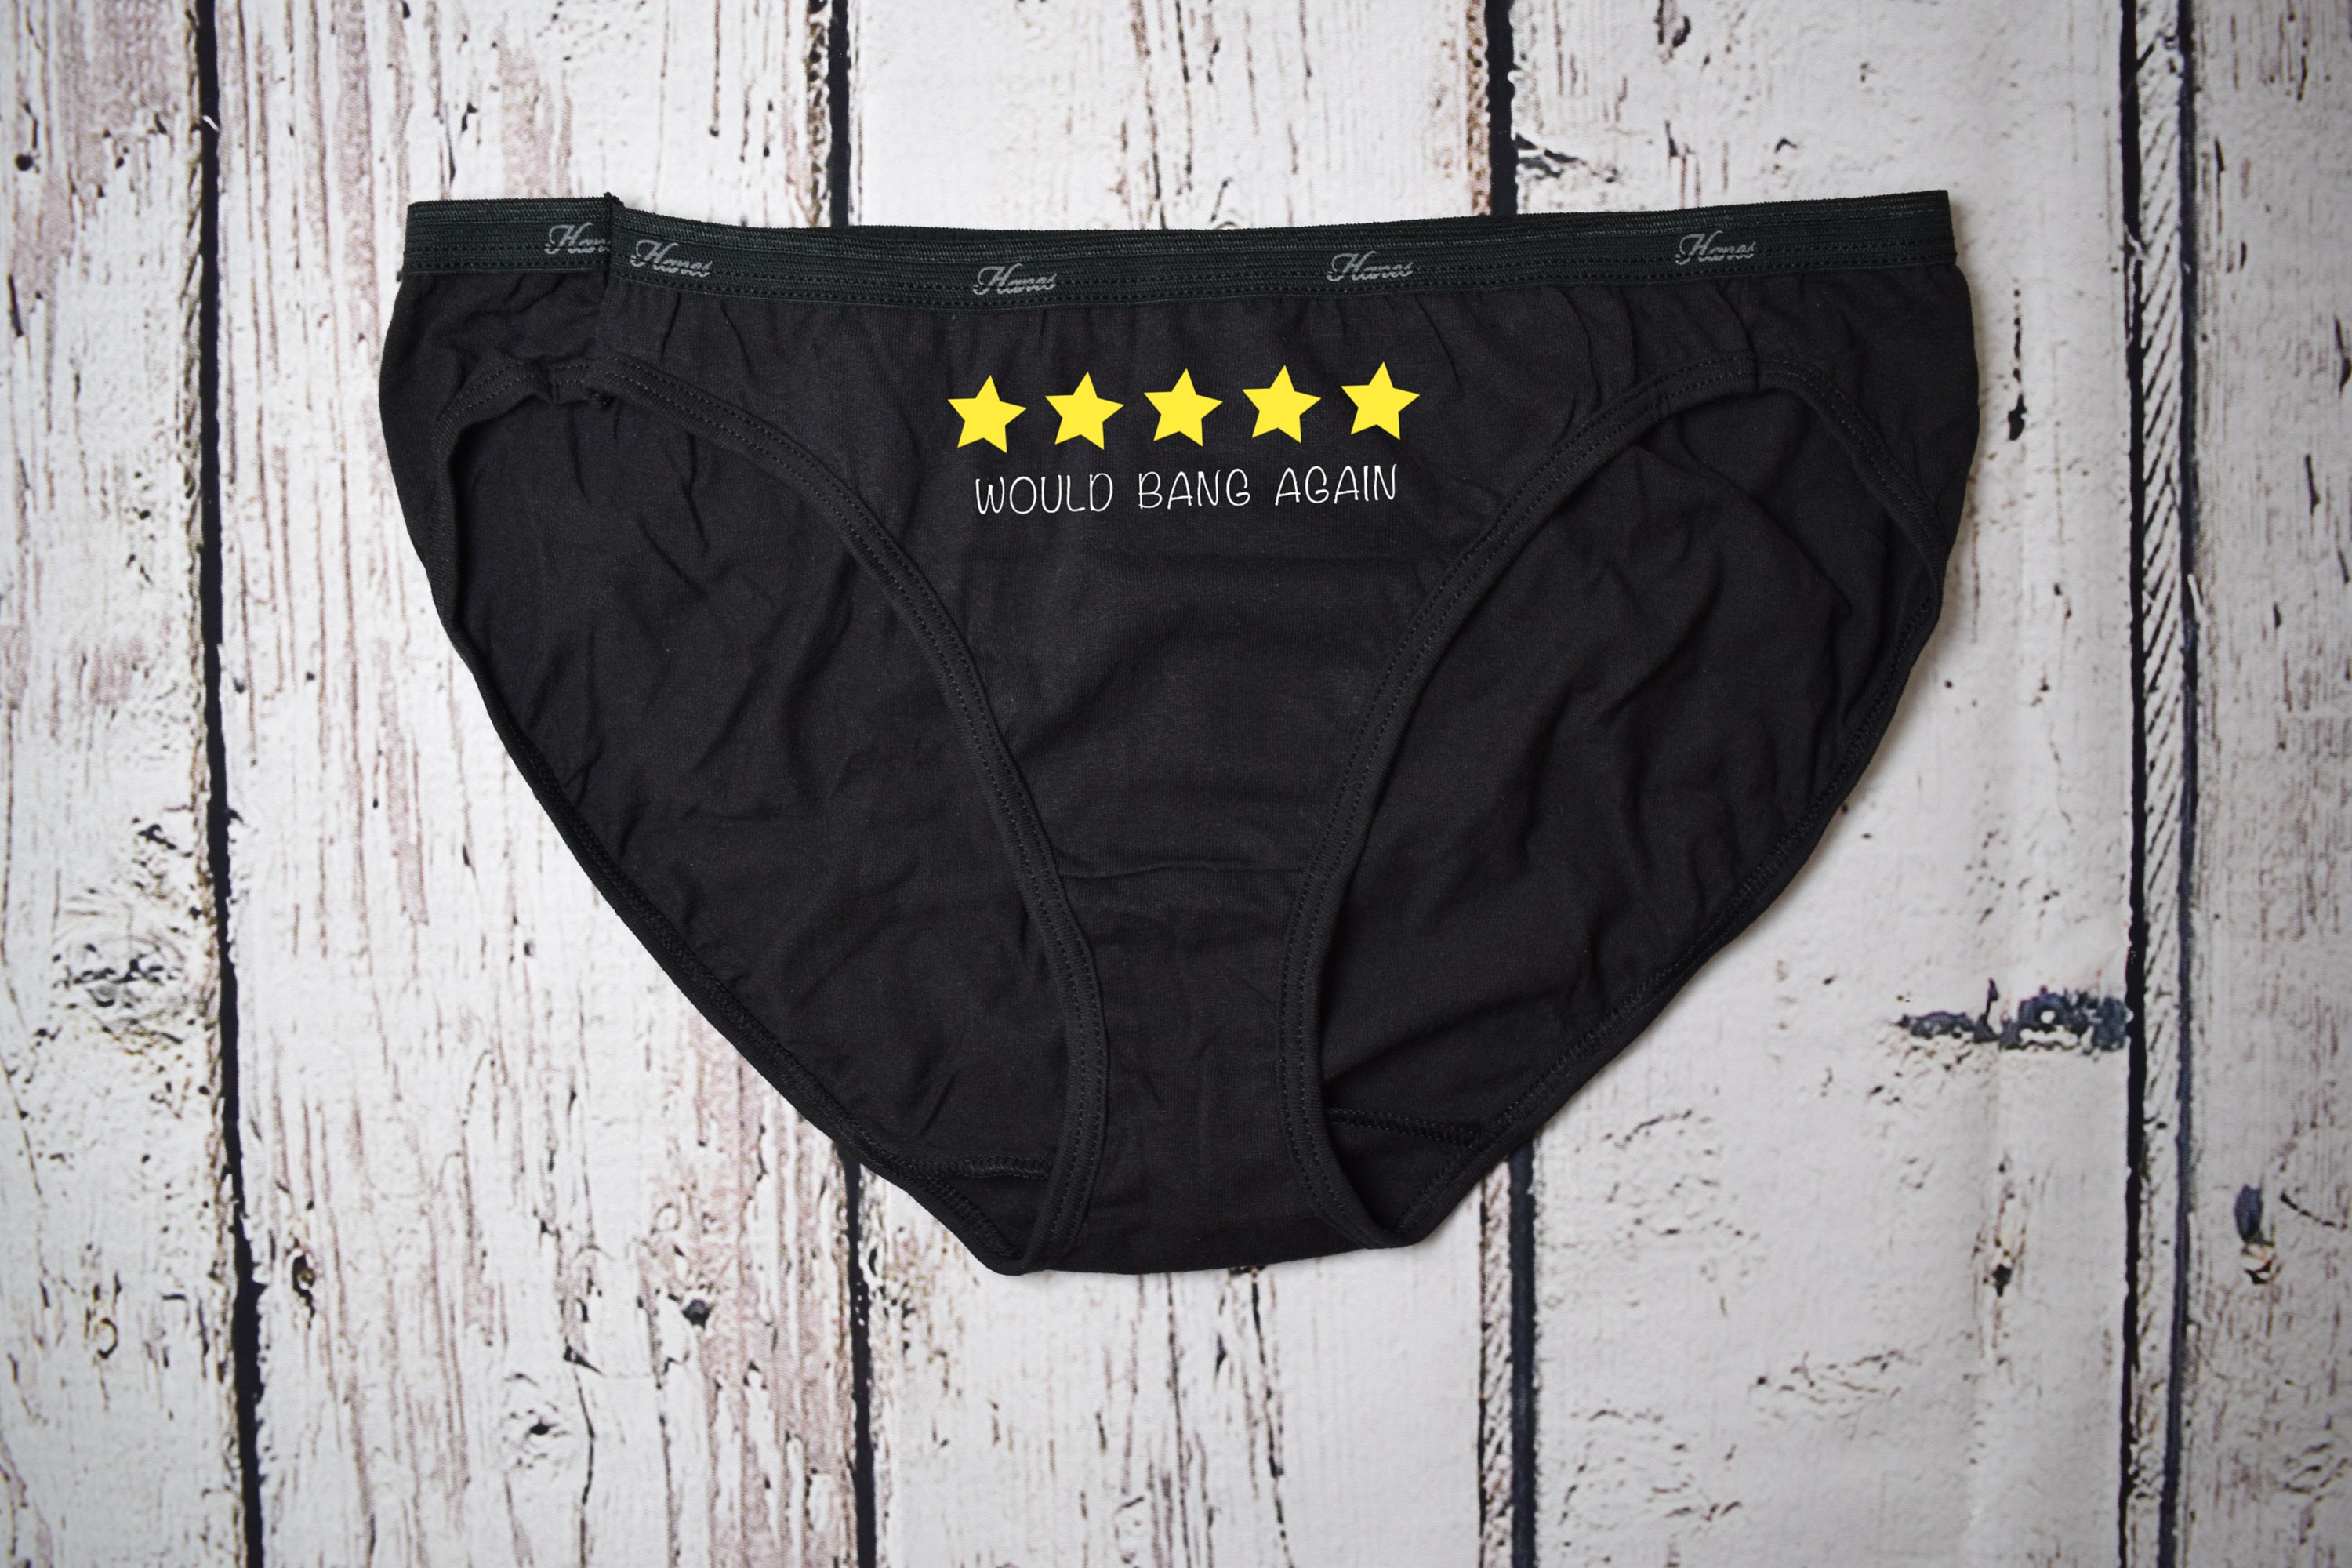 Funny Matching Couples Underwear Five Stars Would Bang/eat Again His and Hers  Underwear Set His & Hers Couples Gift -  Denmark